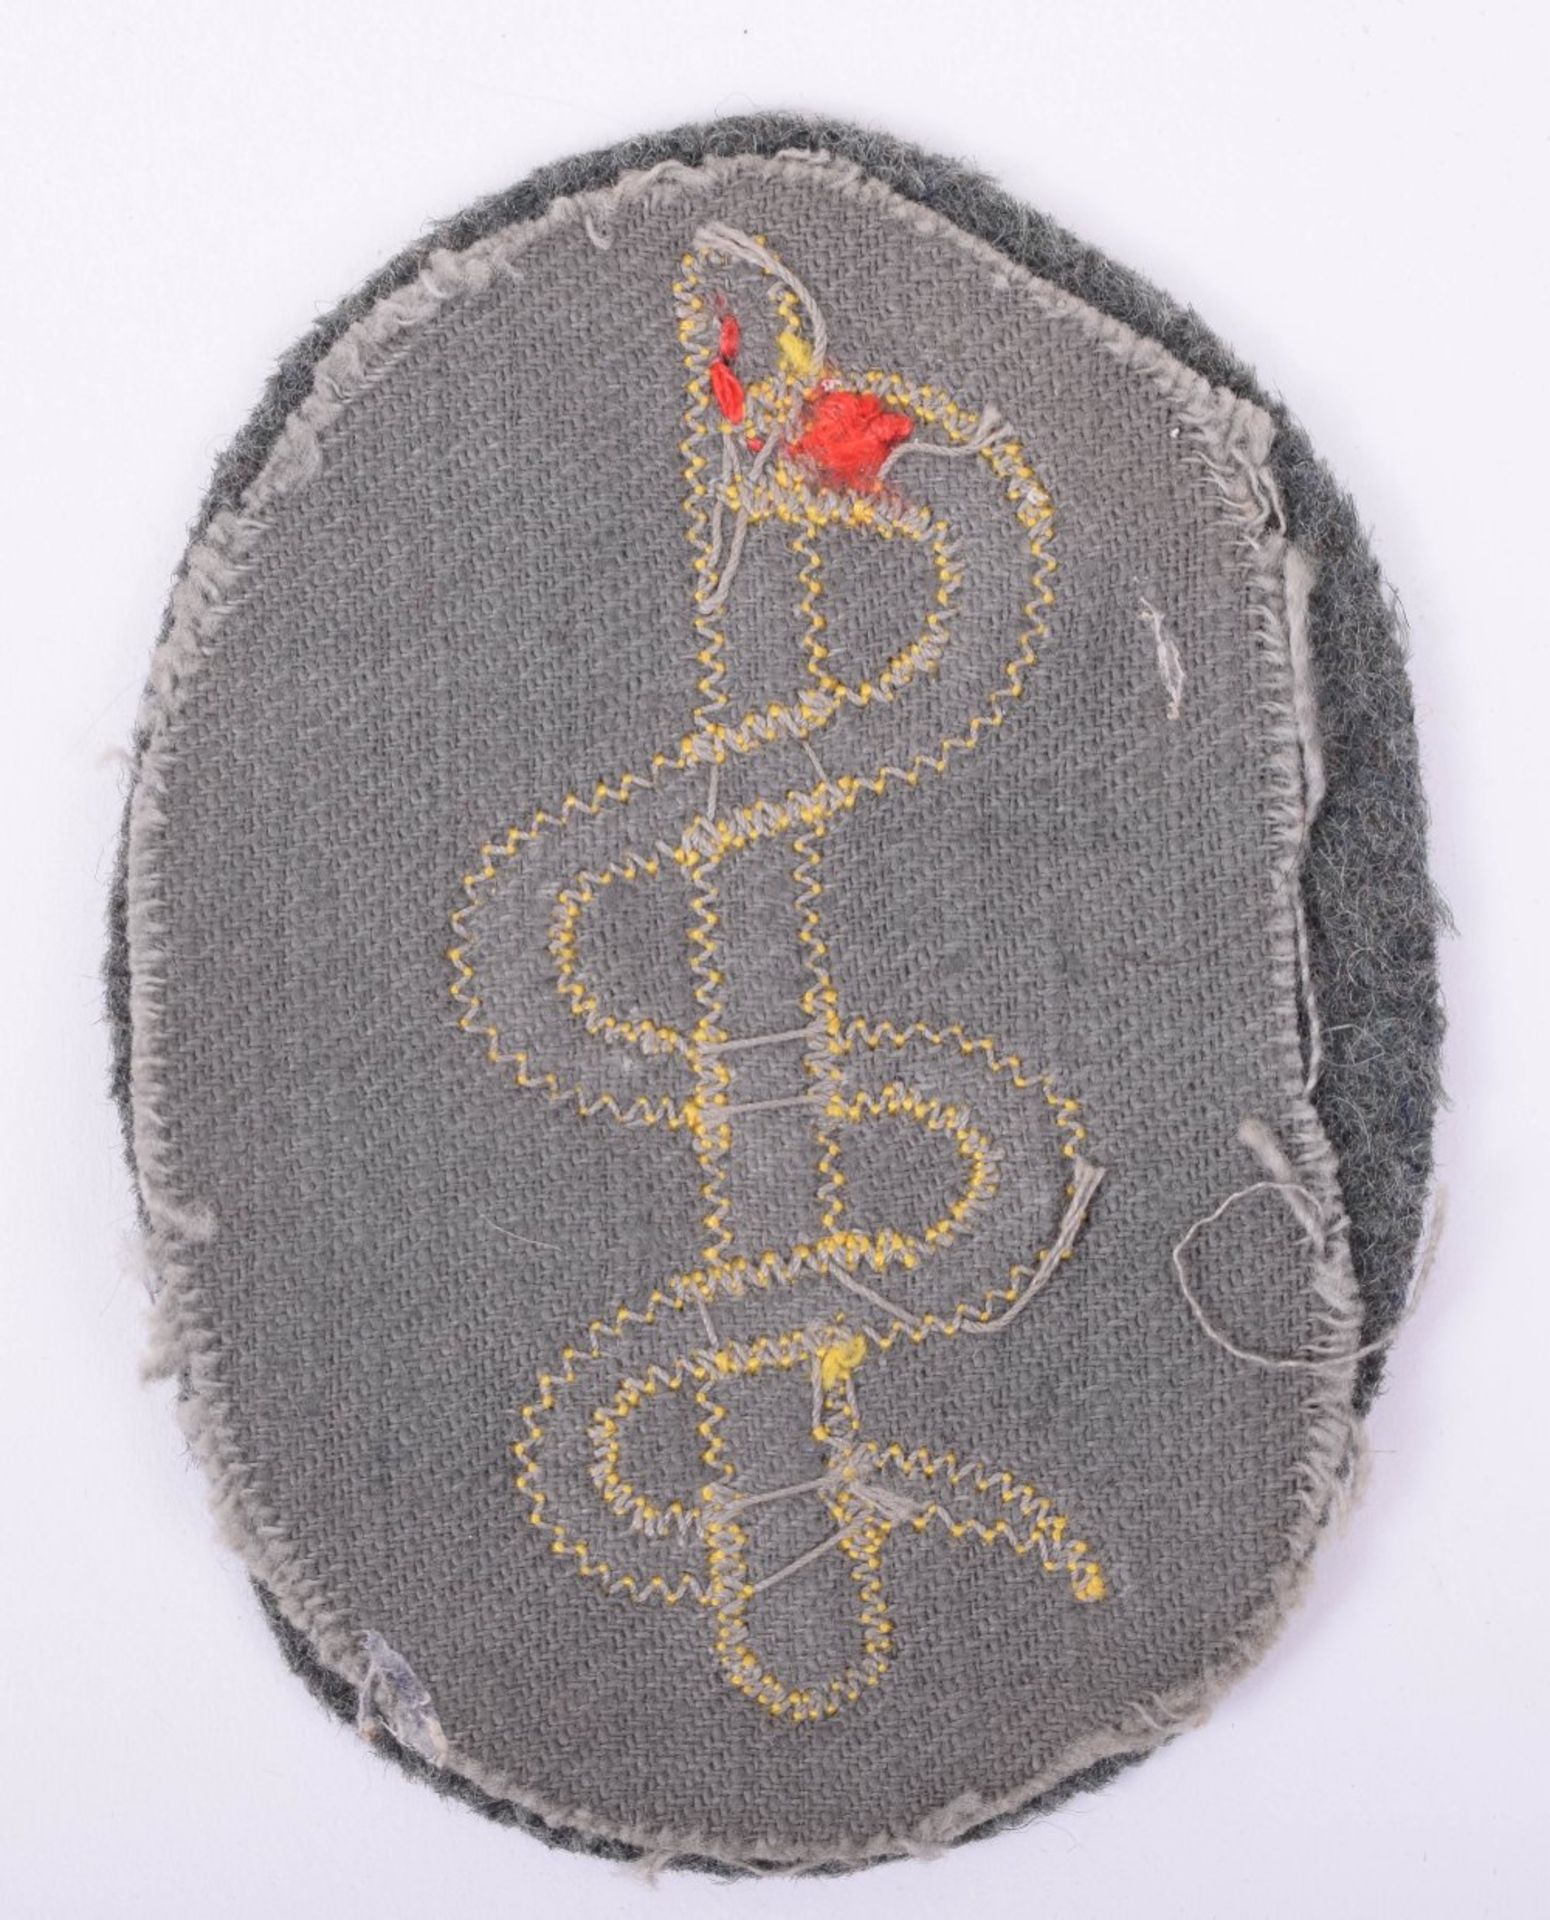 Enlisted Mans Medical Qualification Cloth Arm Badge - Image 2 of 2